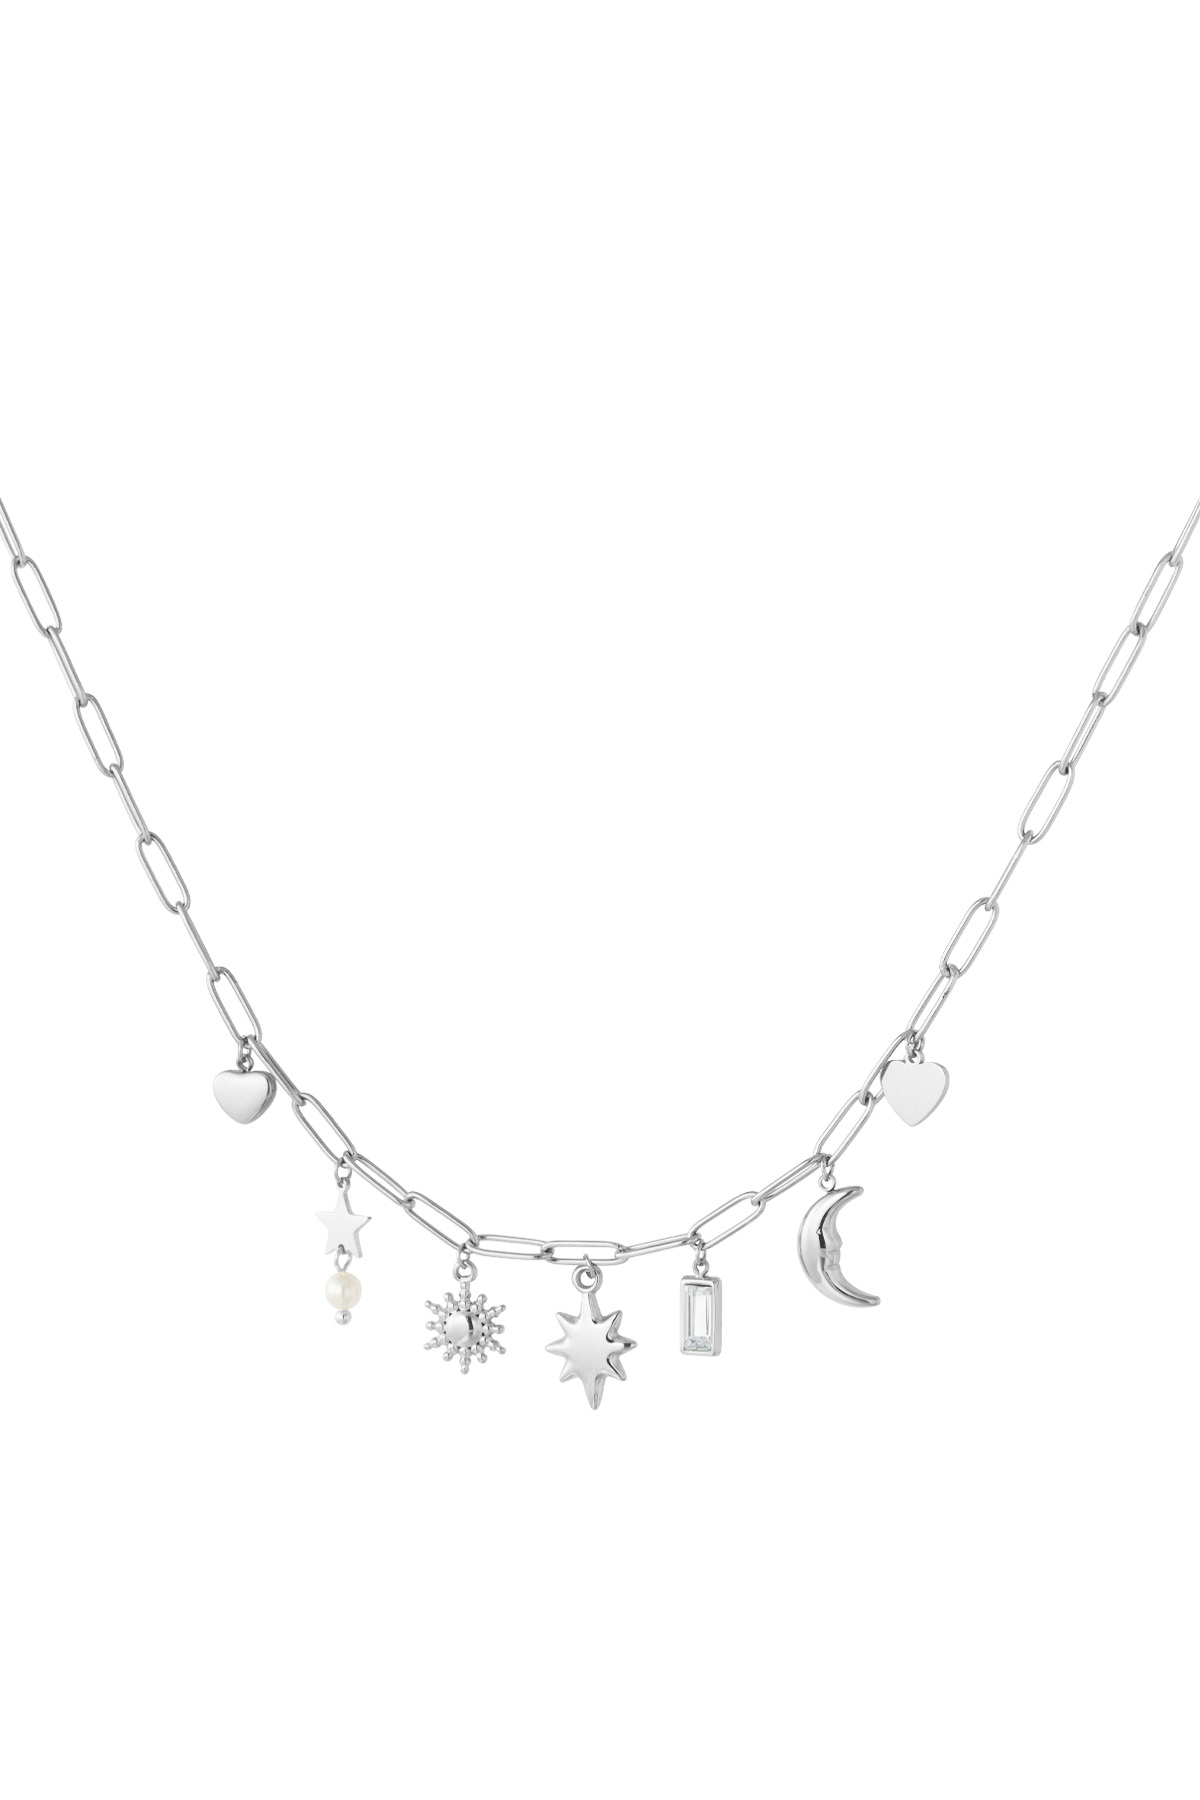 Day and night charm necklace - silver